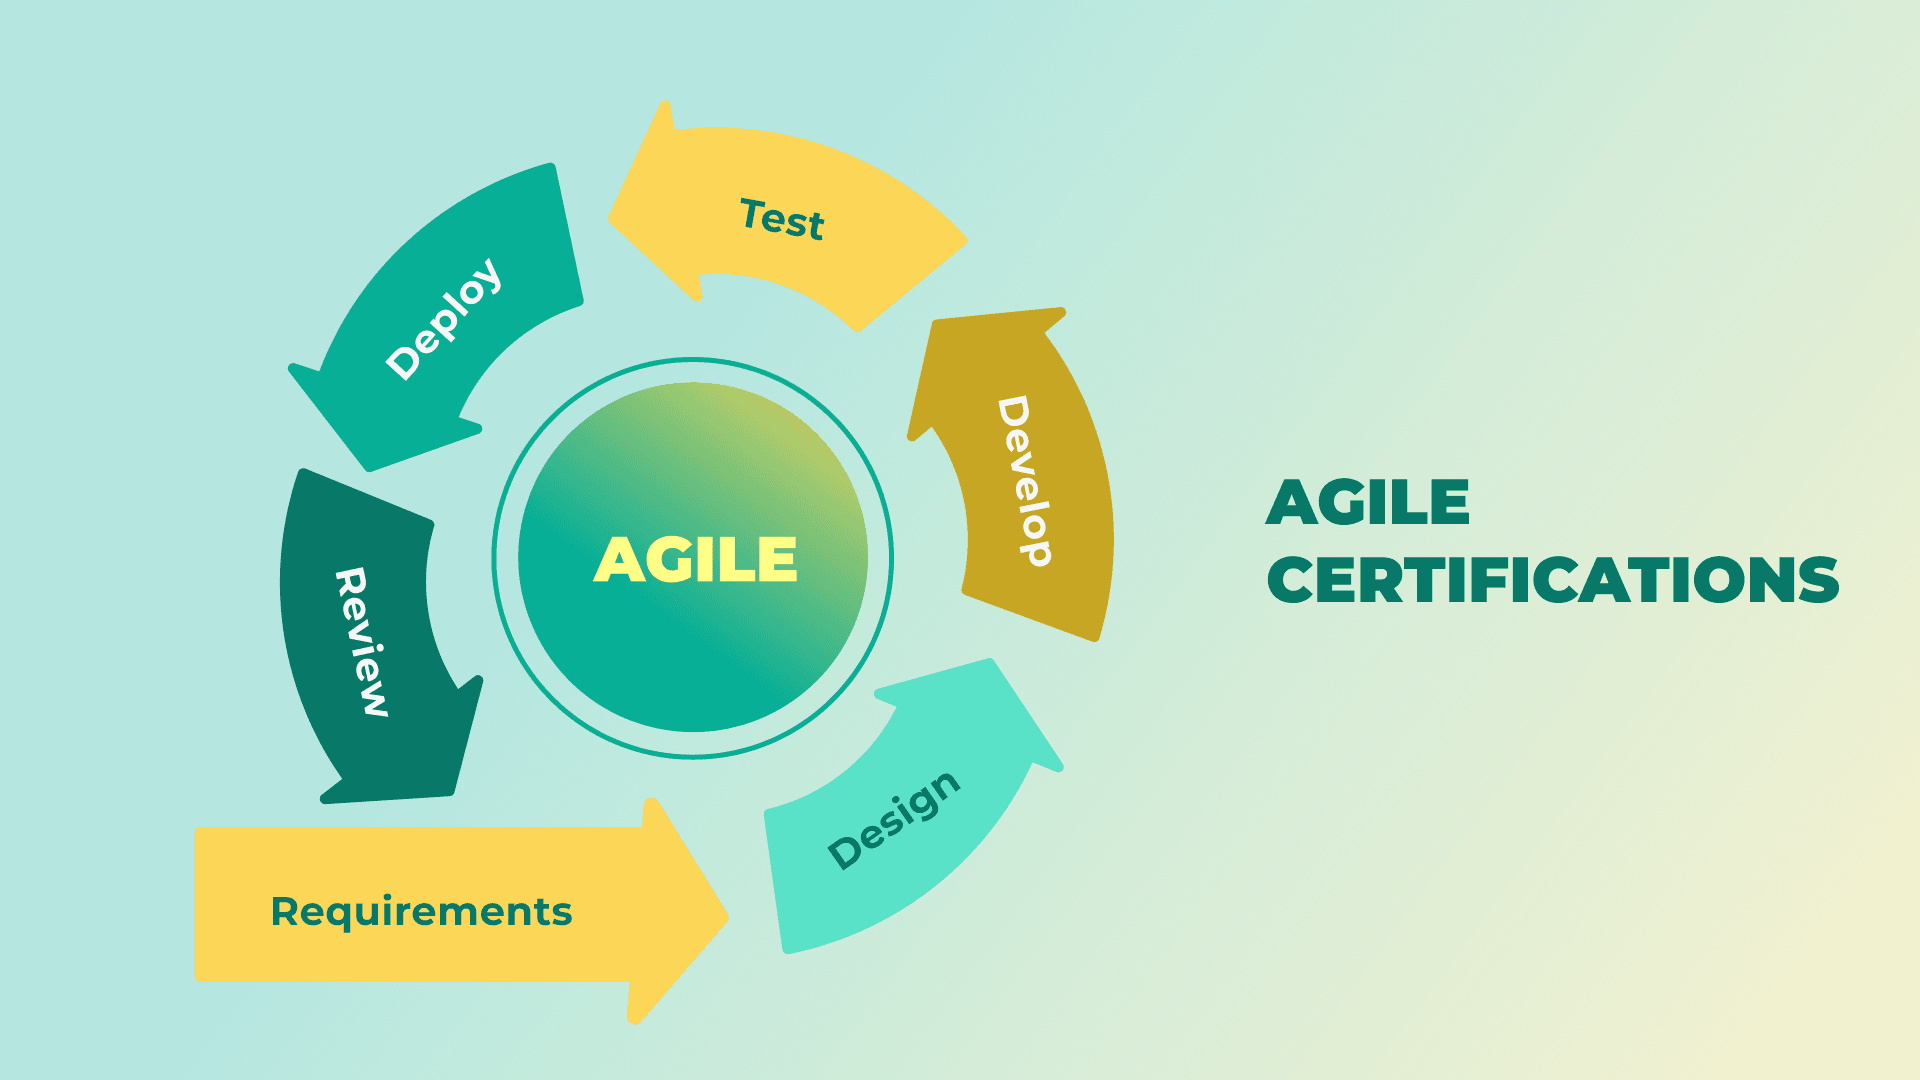 An infographic image of an agile process with agile certifications written on the right